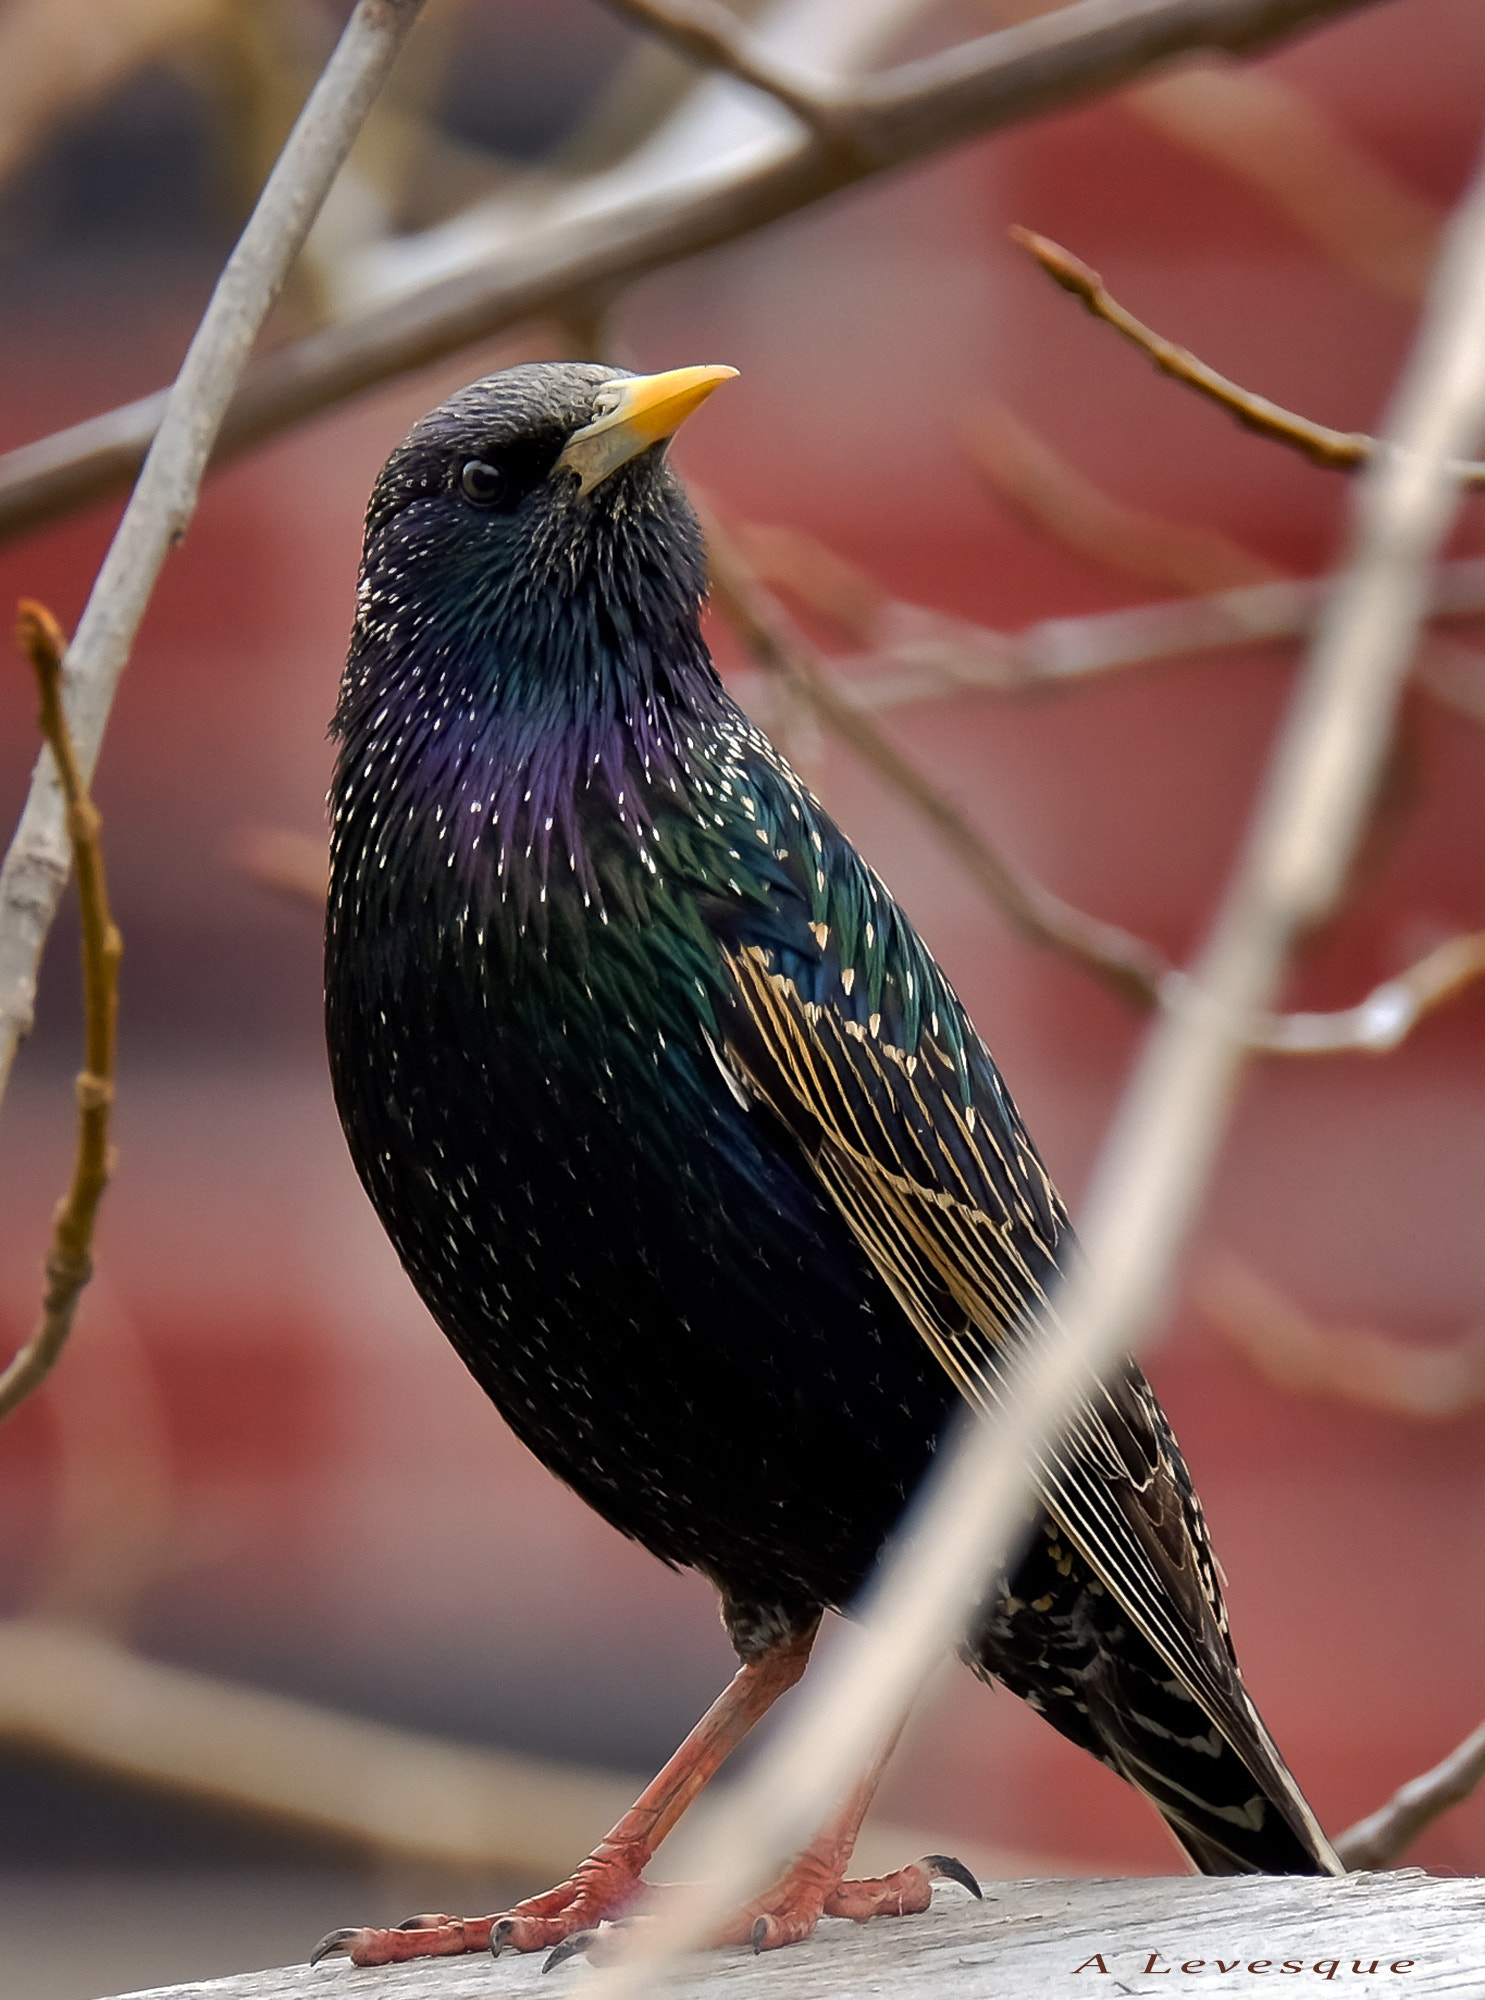 XF100-400mmF4.5-5.6 R LM OIS WR + 1.4x sample photo. European starling photography